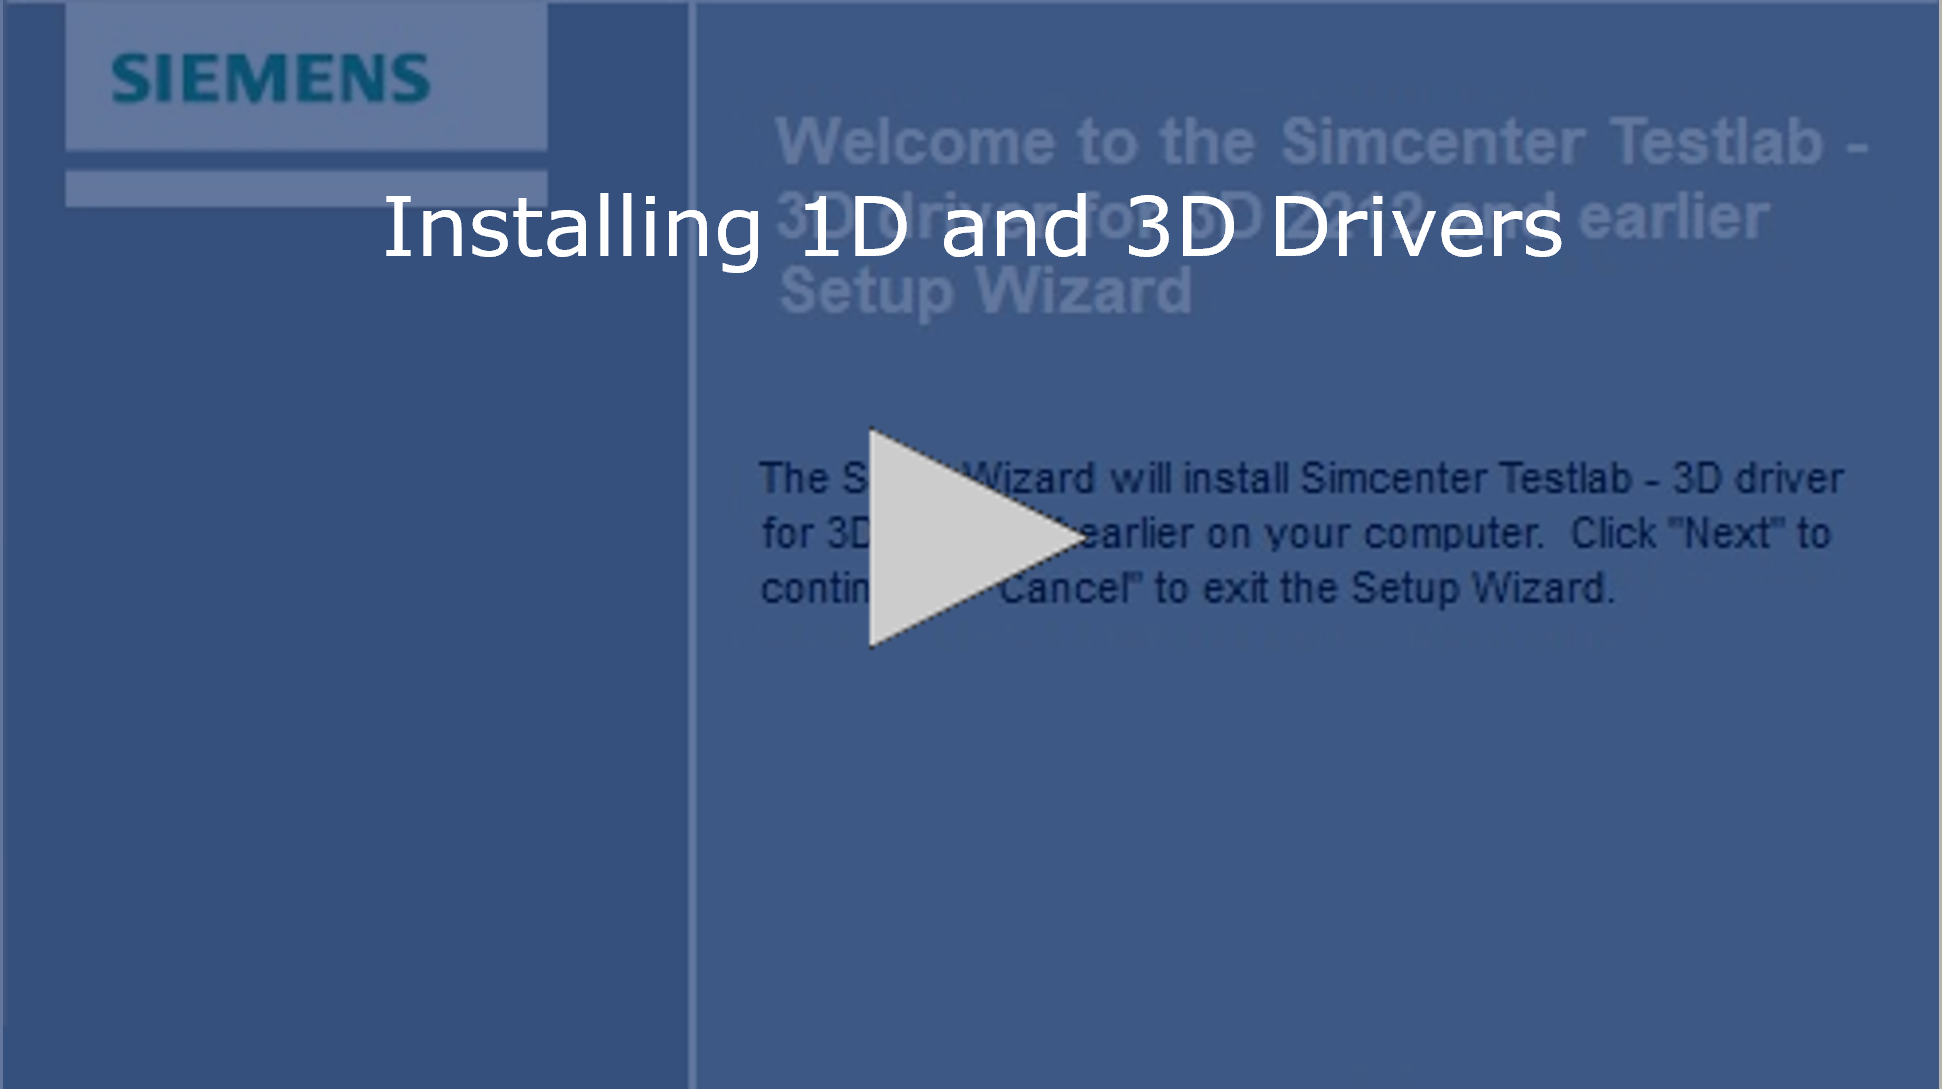 Image link to the video walkthrough for installing the 1D and 3D drivers.